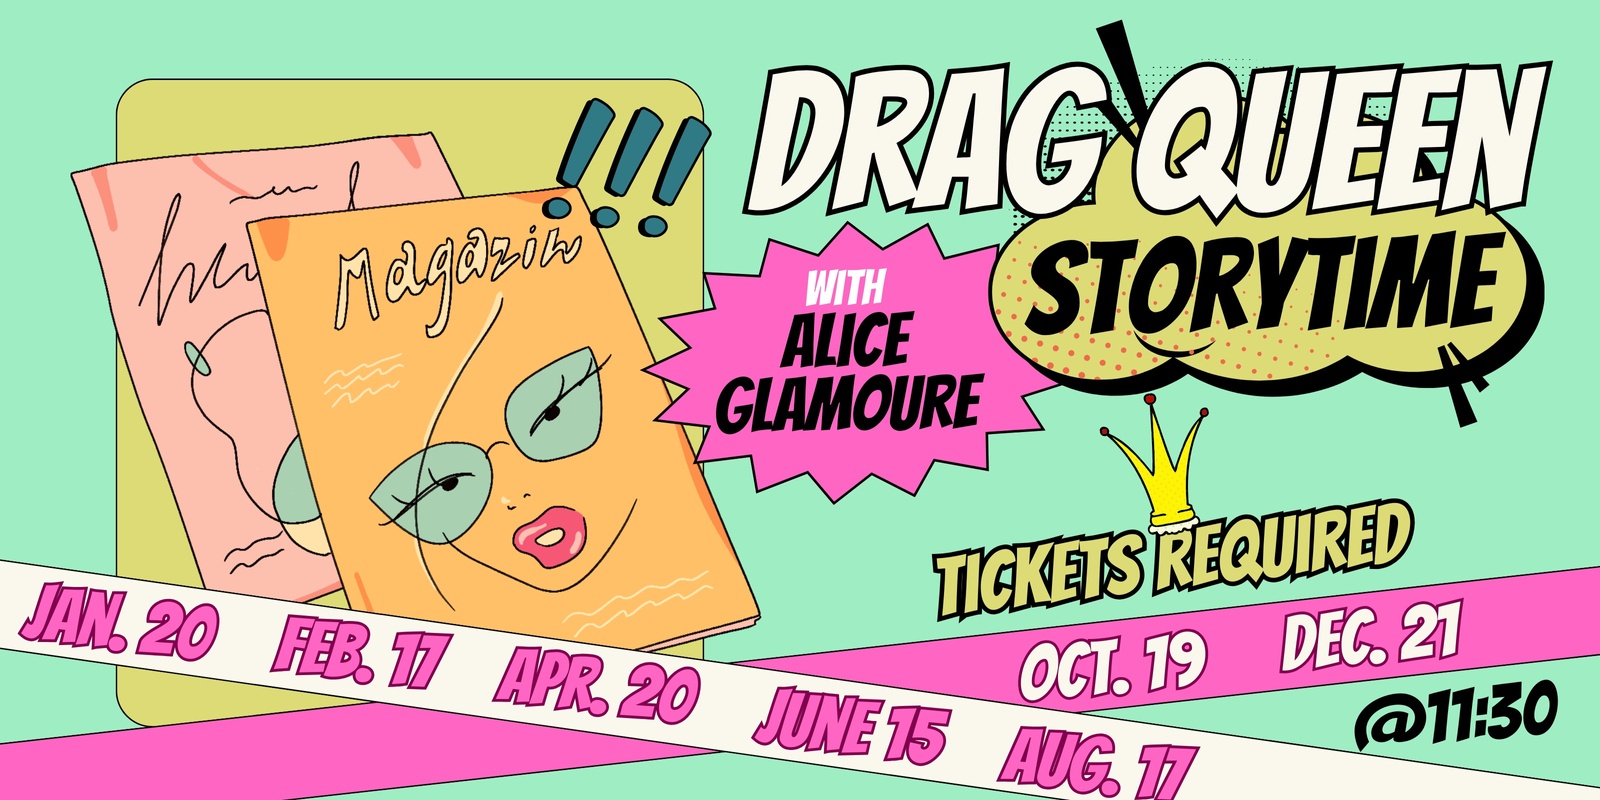 Banner image for Drag Queen Storytime with Alice Glamoure